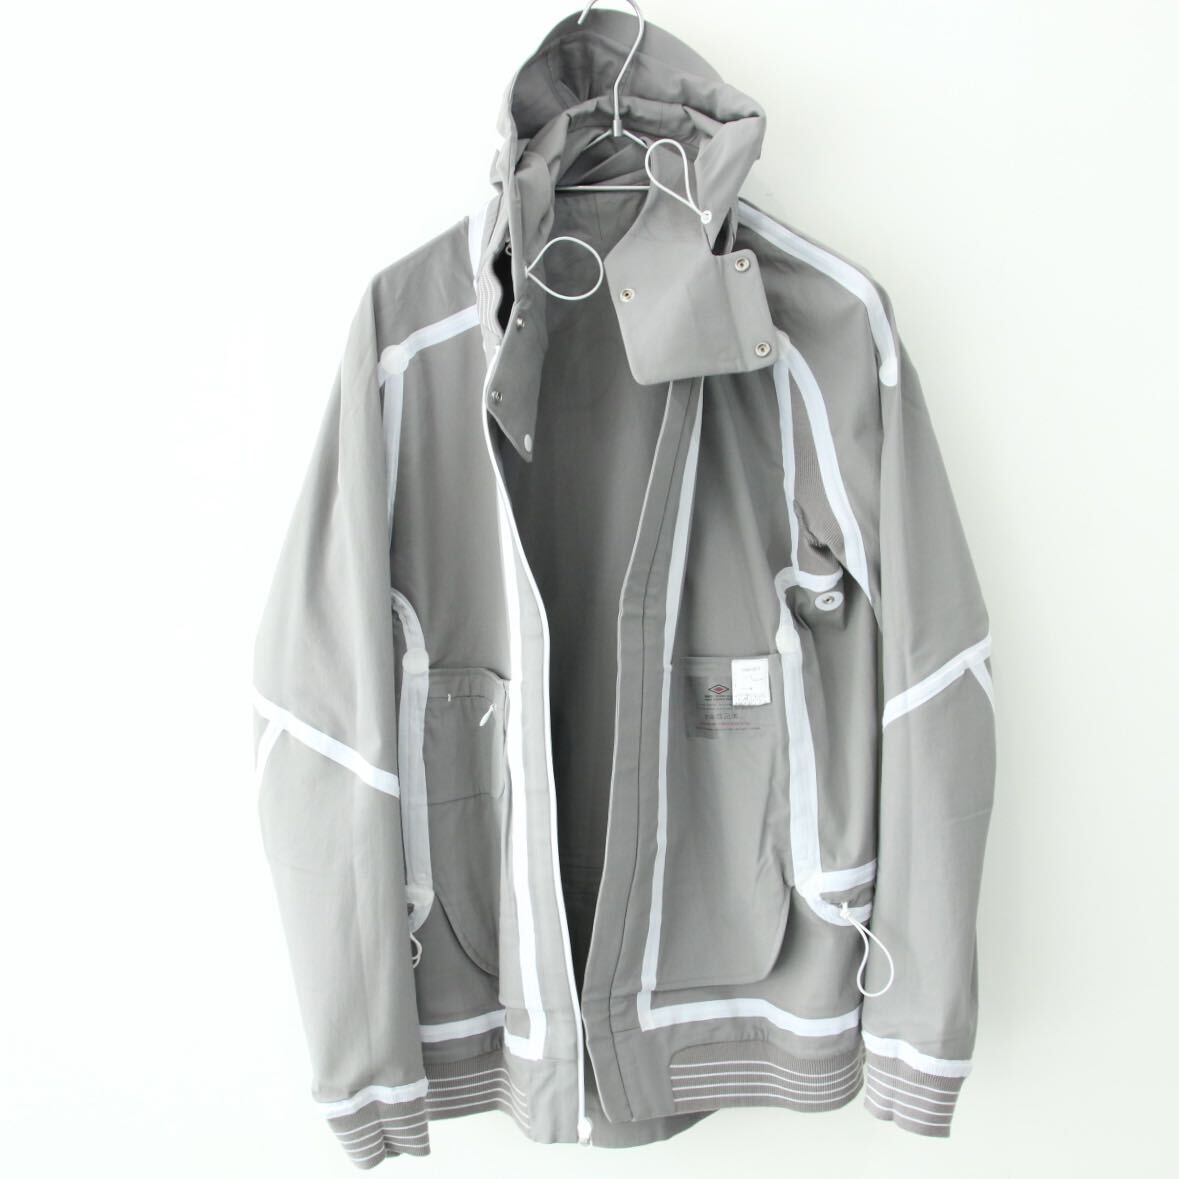 Umbro Aitor Throup Archive Research Project RAMSAY JACKET Size L アンブロ アイタースロープ acronym アクロニウム C.P.COMPANY_画像7